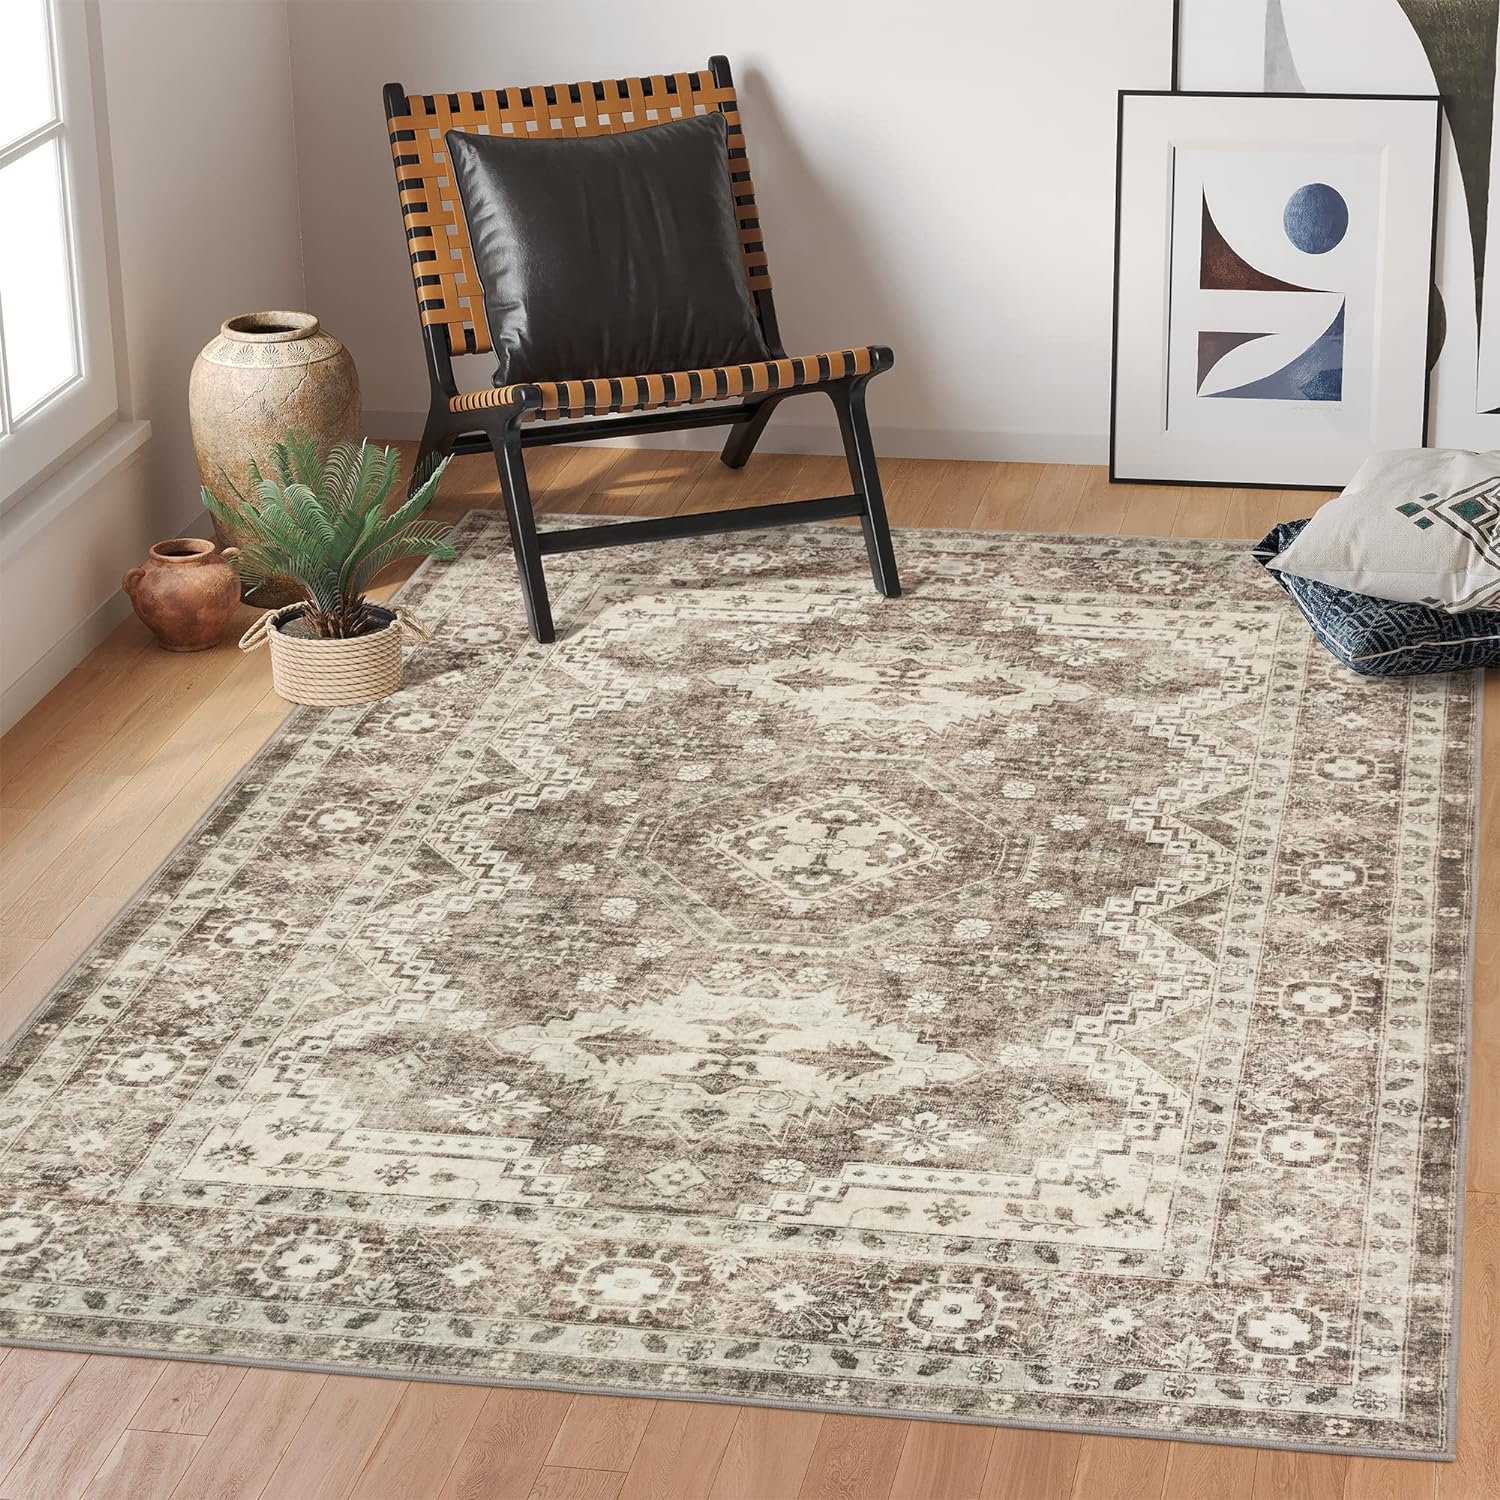 Limited-Time Discount! Get 20% Off on Rugland 8x10 Area Rugs